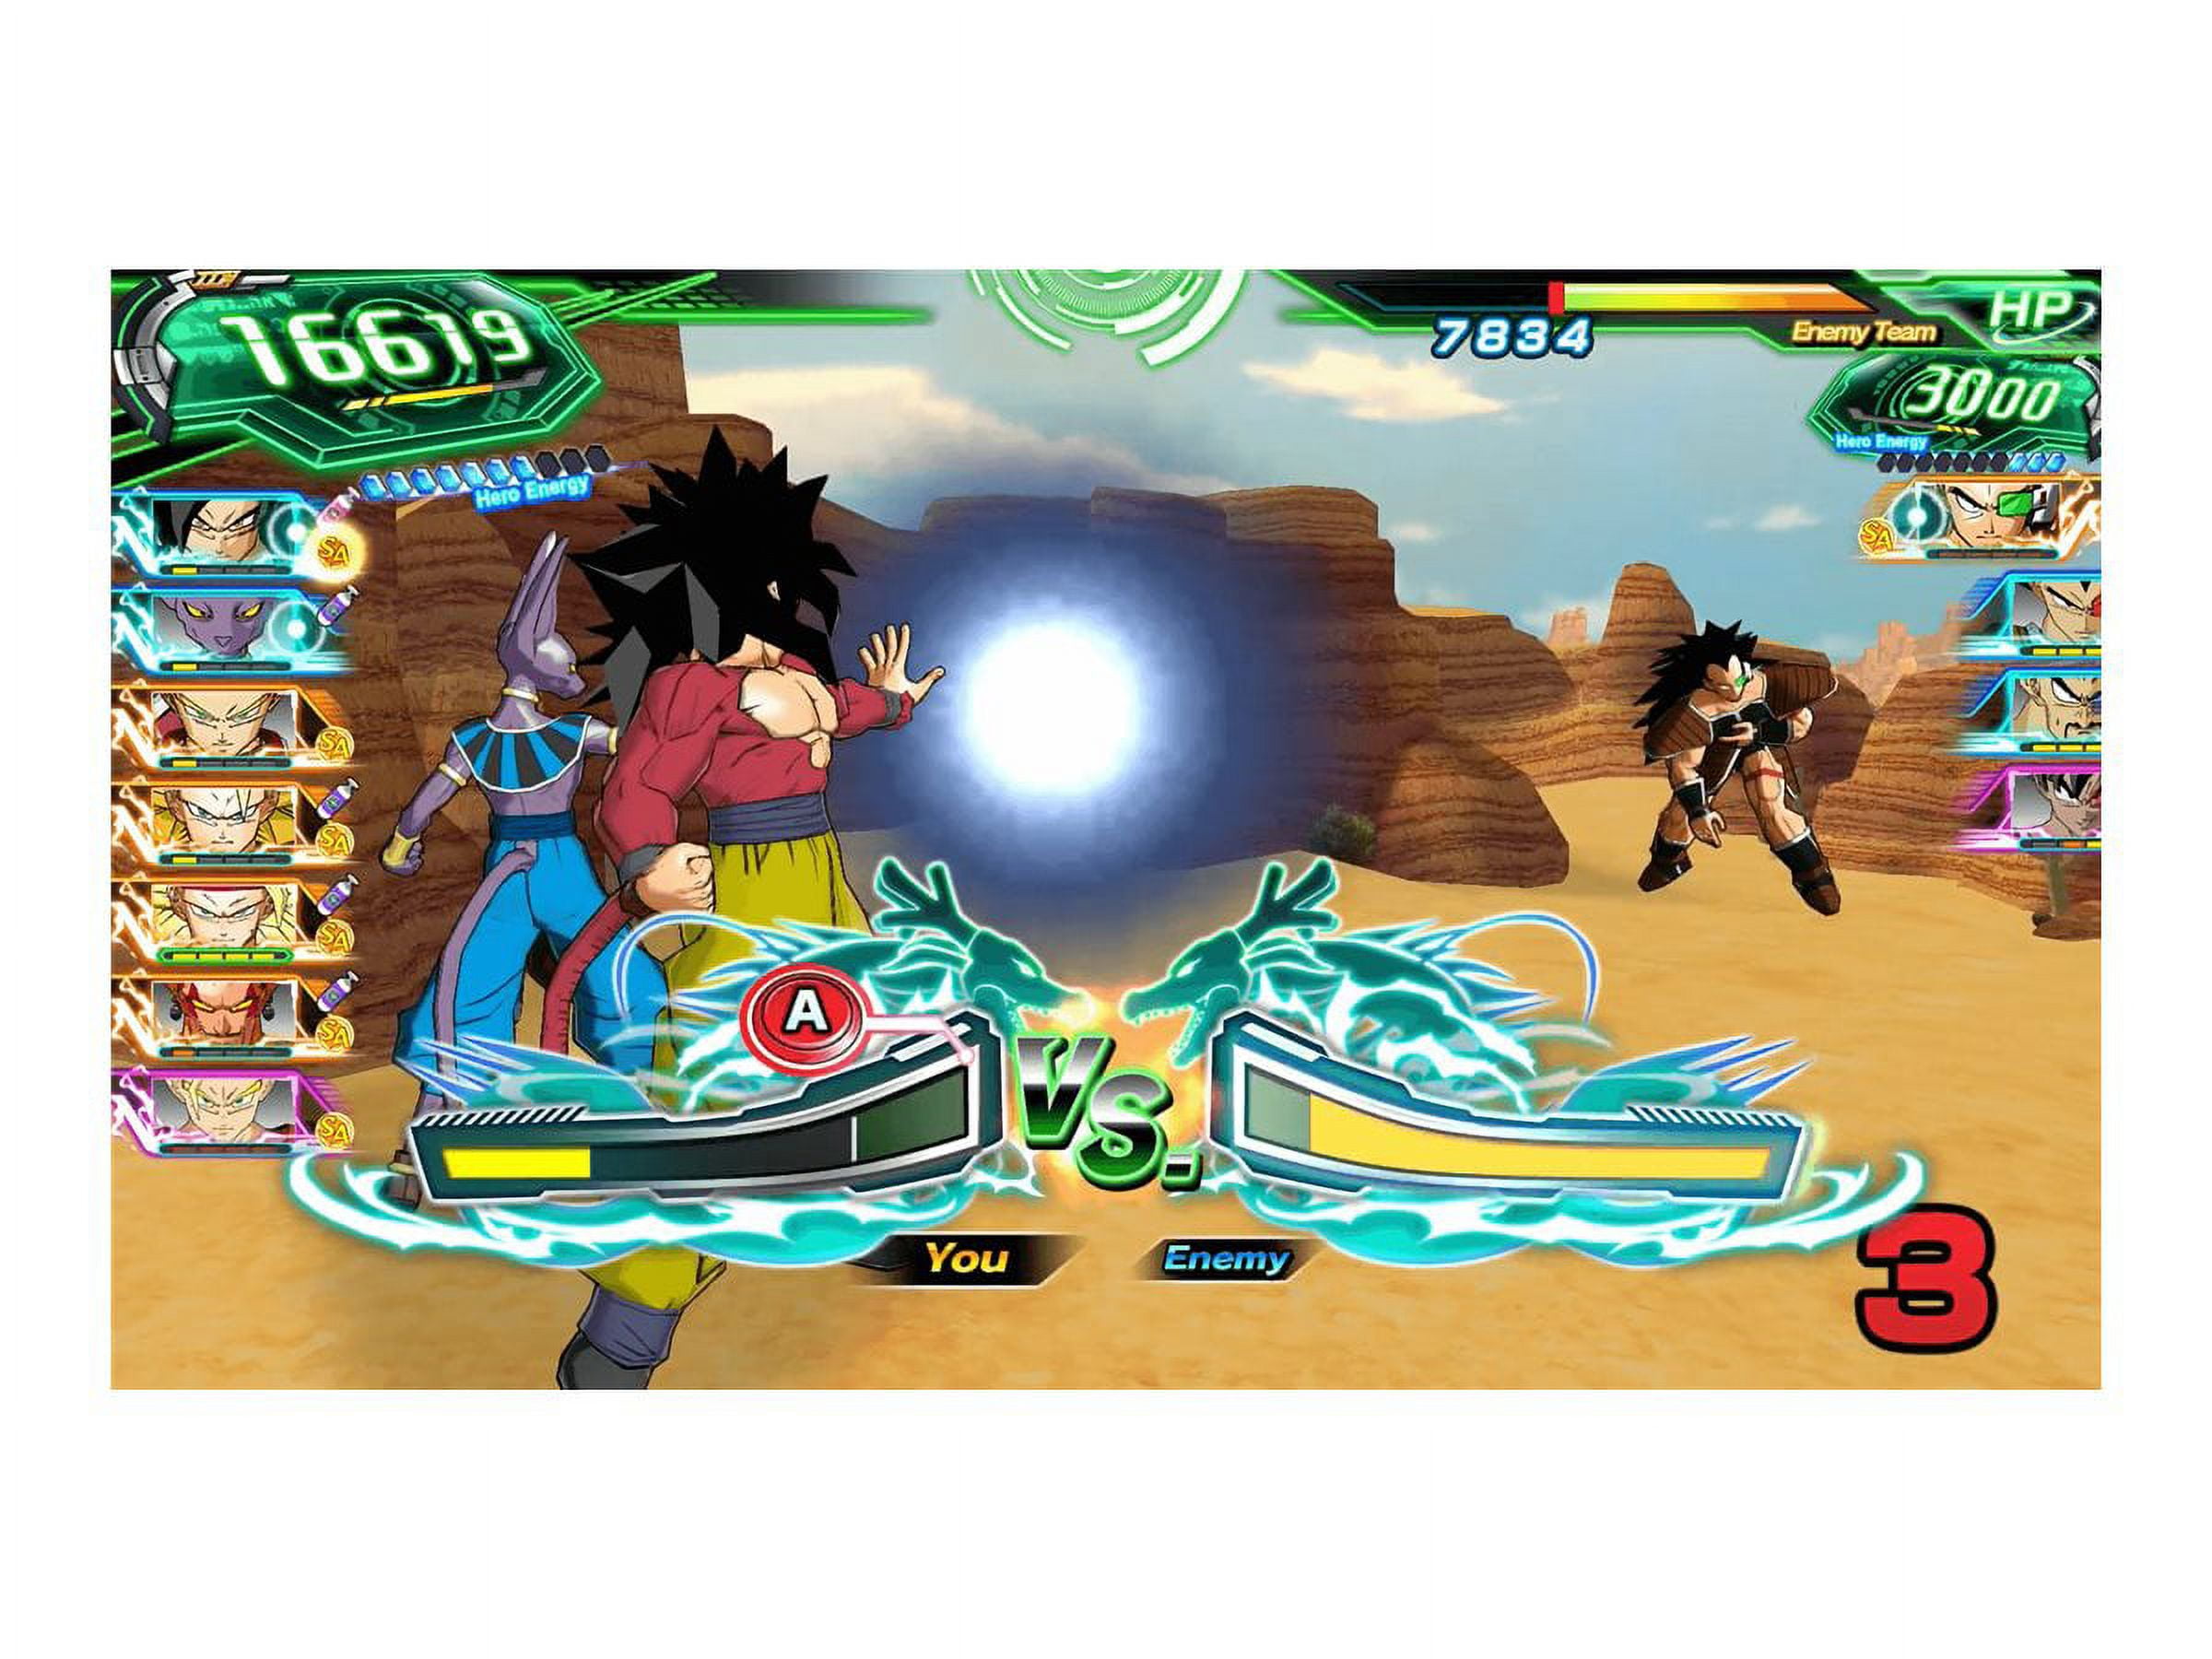 Jeux Nintendo Switch NINTENDO SWITCH SUPER DRAGON BALL HEROES - Scoop gaming